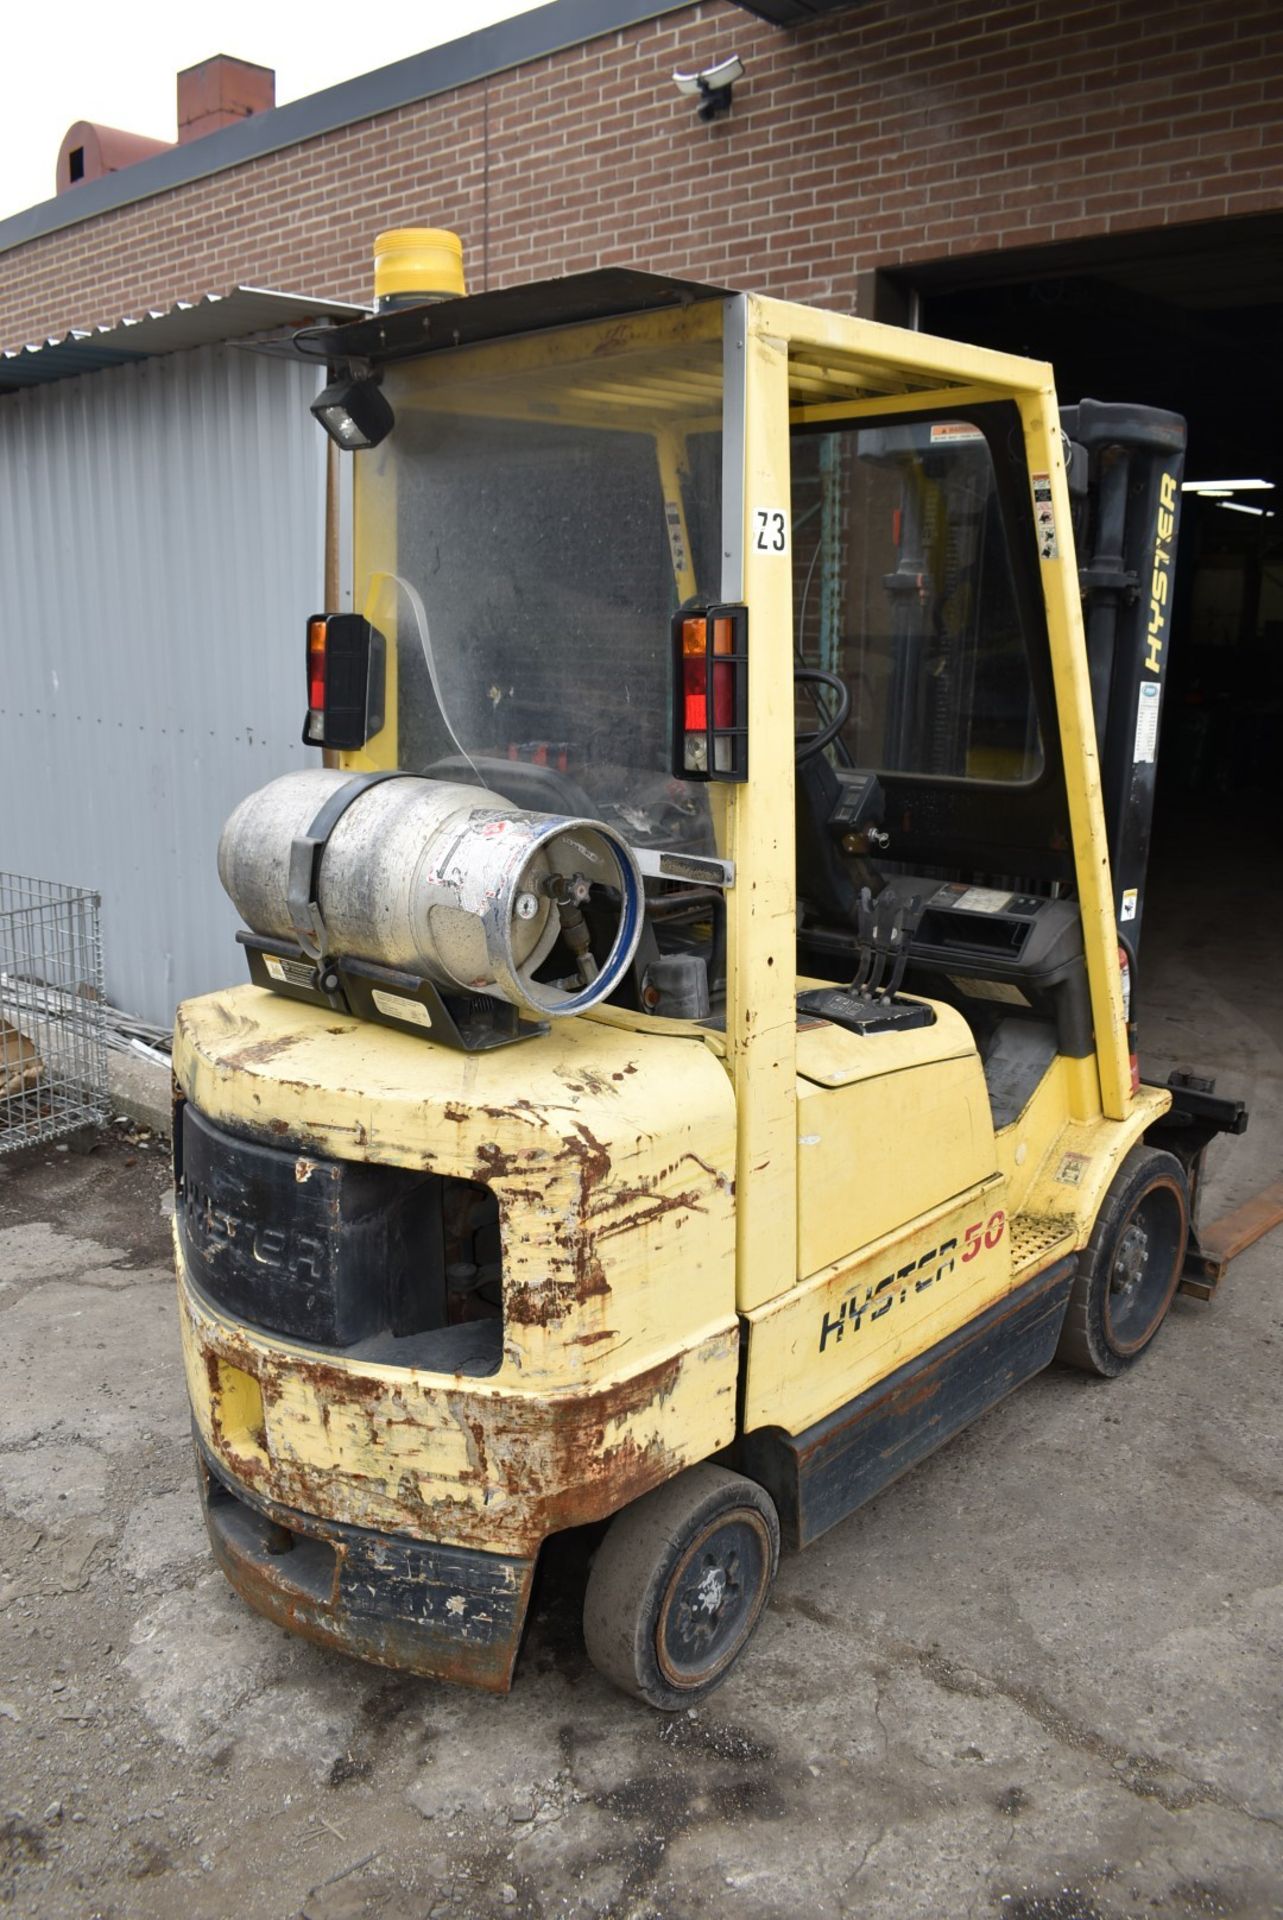 HYSTER S50XM 5,000 LB. CAPACITY LPG FORKLIFT WITH 189" MAX. LIFT HEIGHT, 3-STAGE MAST, SIDE SHIFT, - Image 6 of 16